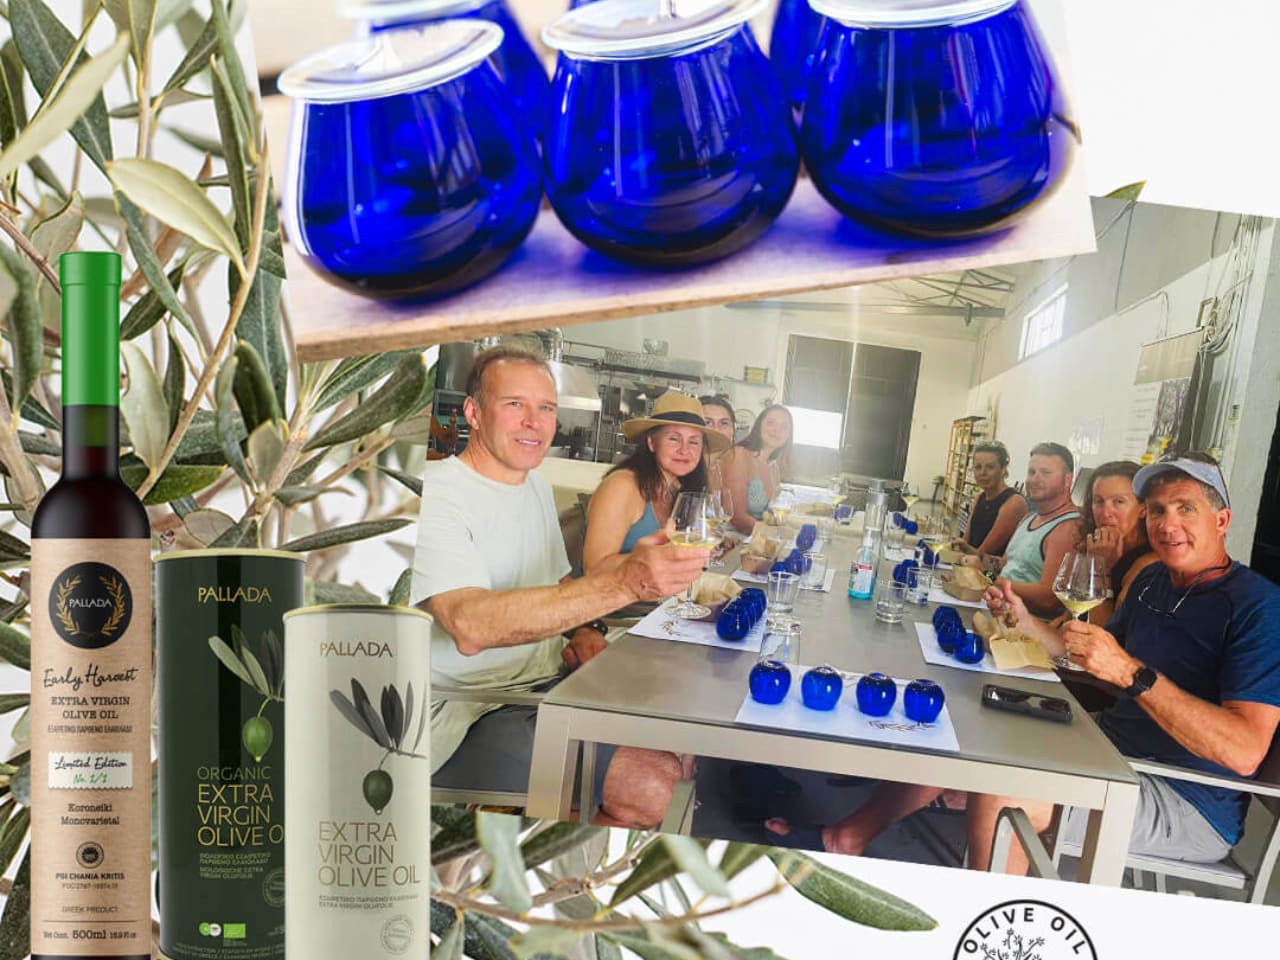 Olive Oil Tasting Tours at Pallada Mill, chania olive oil tasting tours, tasting extra virgin olive oil chania crete, activities chania crete, best organic olive oil tasting tour chania, cretan olive oil activity, things to do chania crete